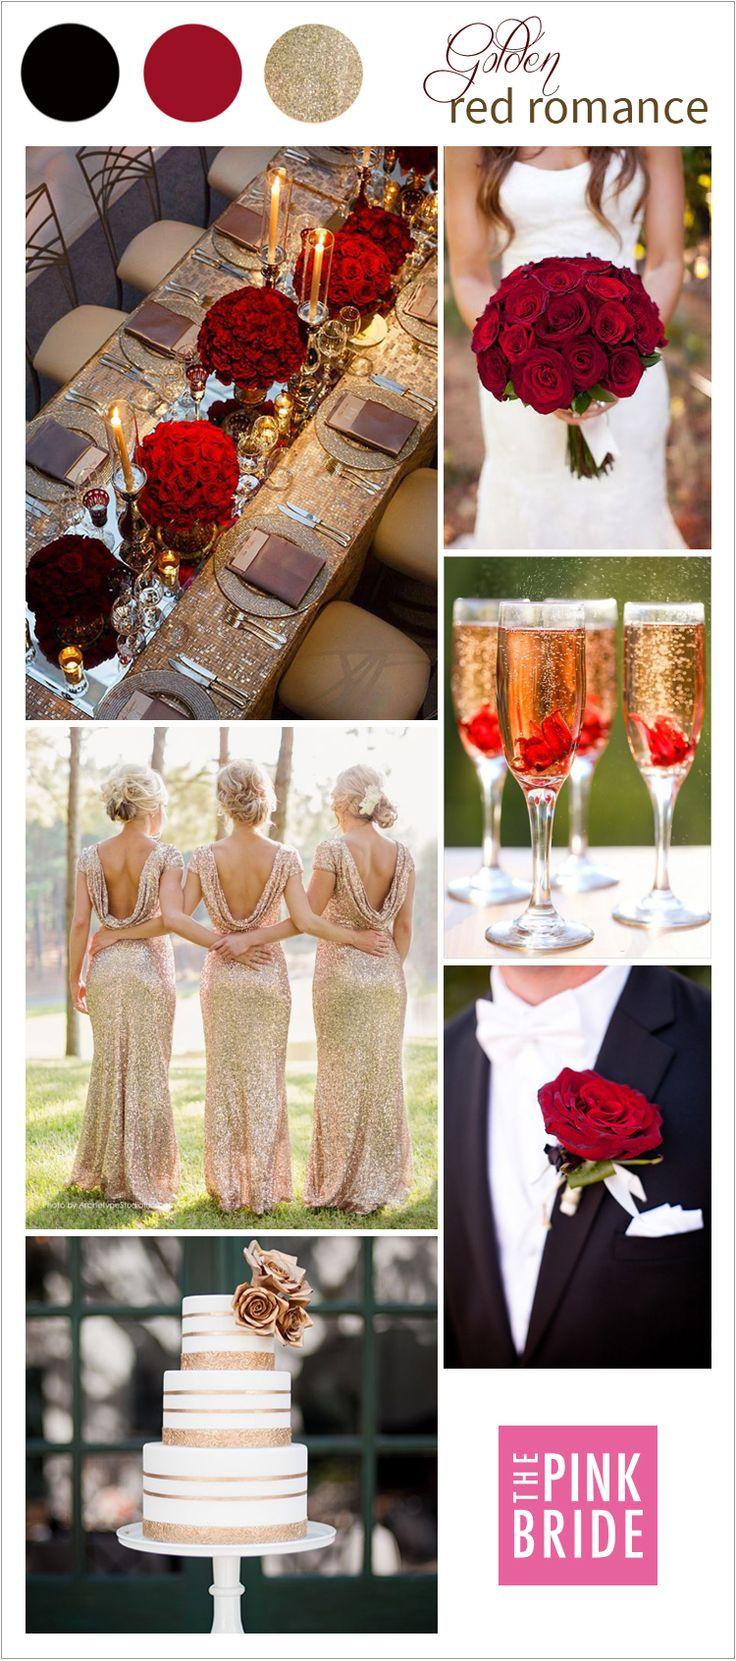 Mariage - Wedding Color Board: Golden Red Romance